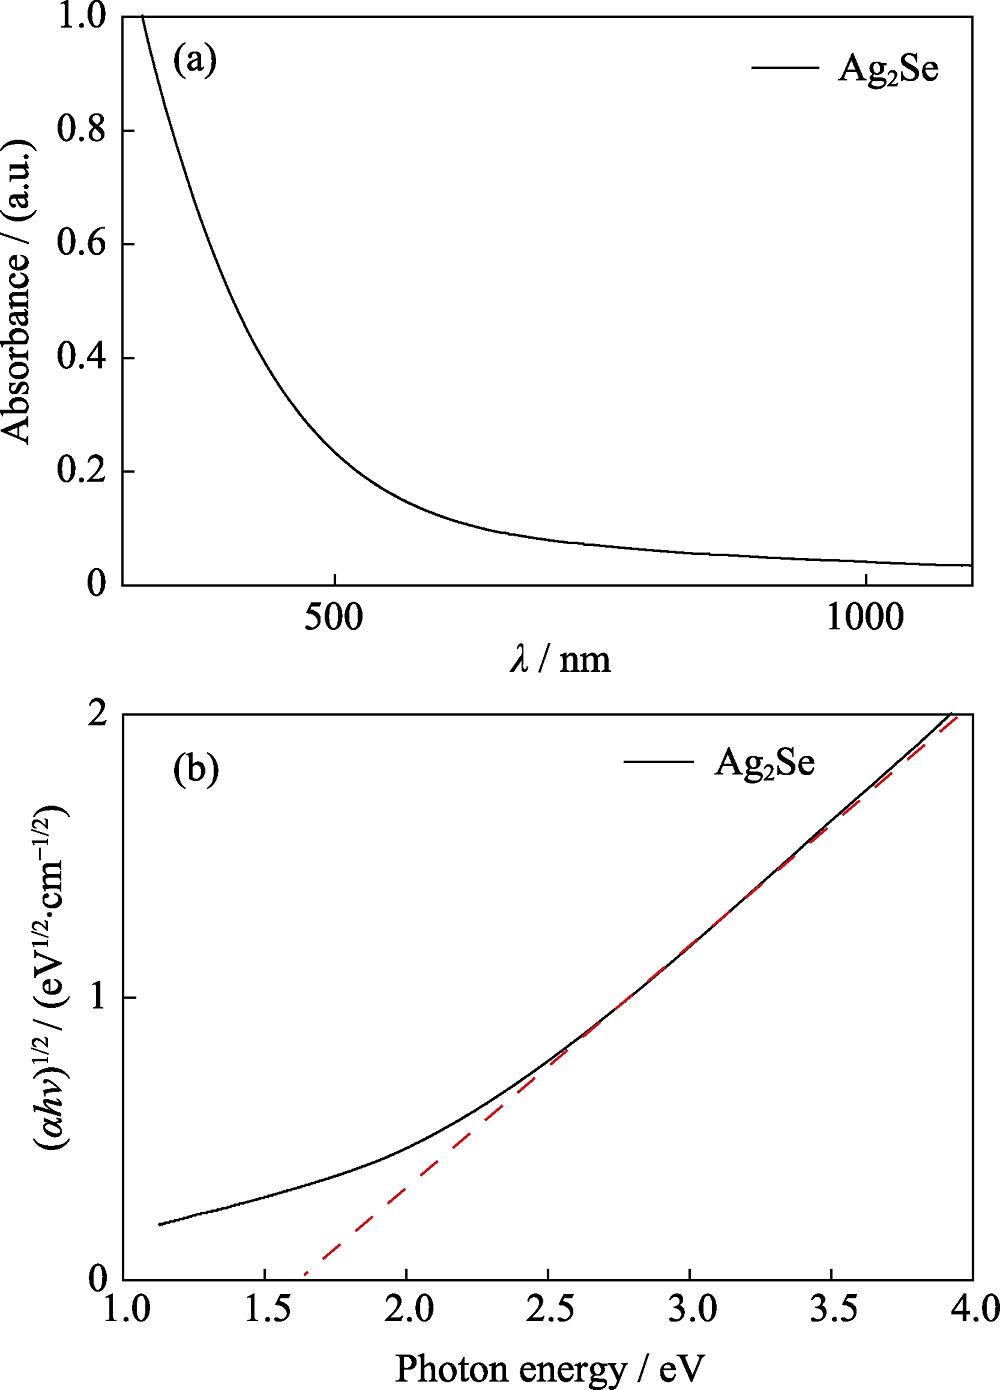 (a) Absorption spectrum and (b) corresponding Tauc plot of the Ag2Se quantum dots in ethanol solution